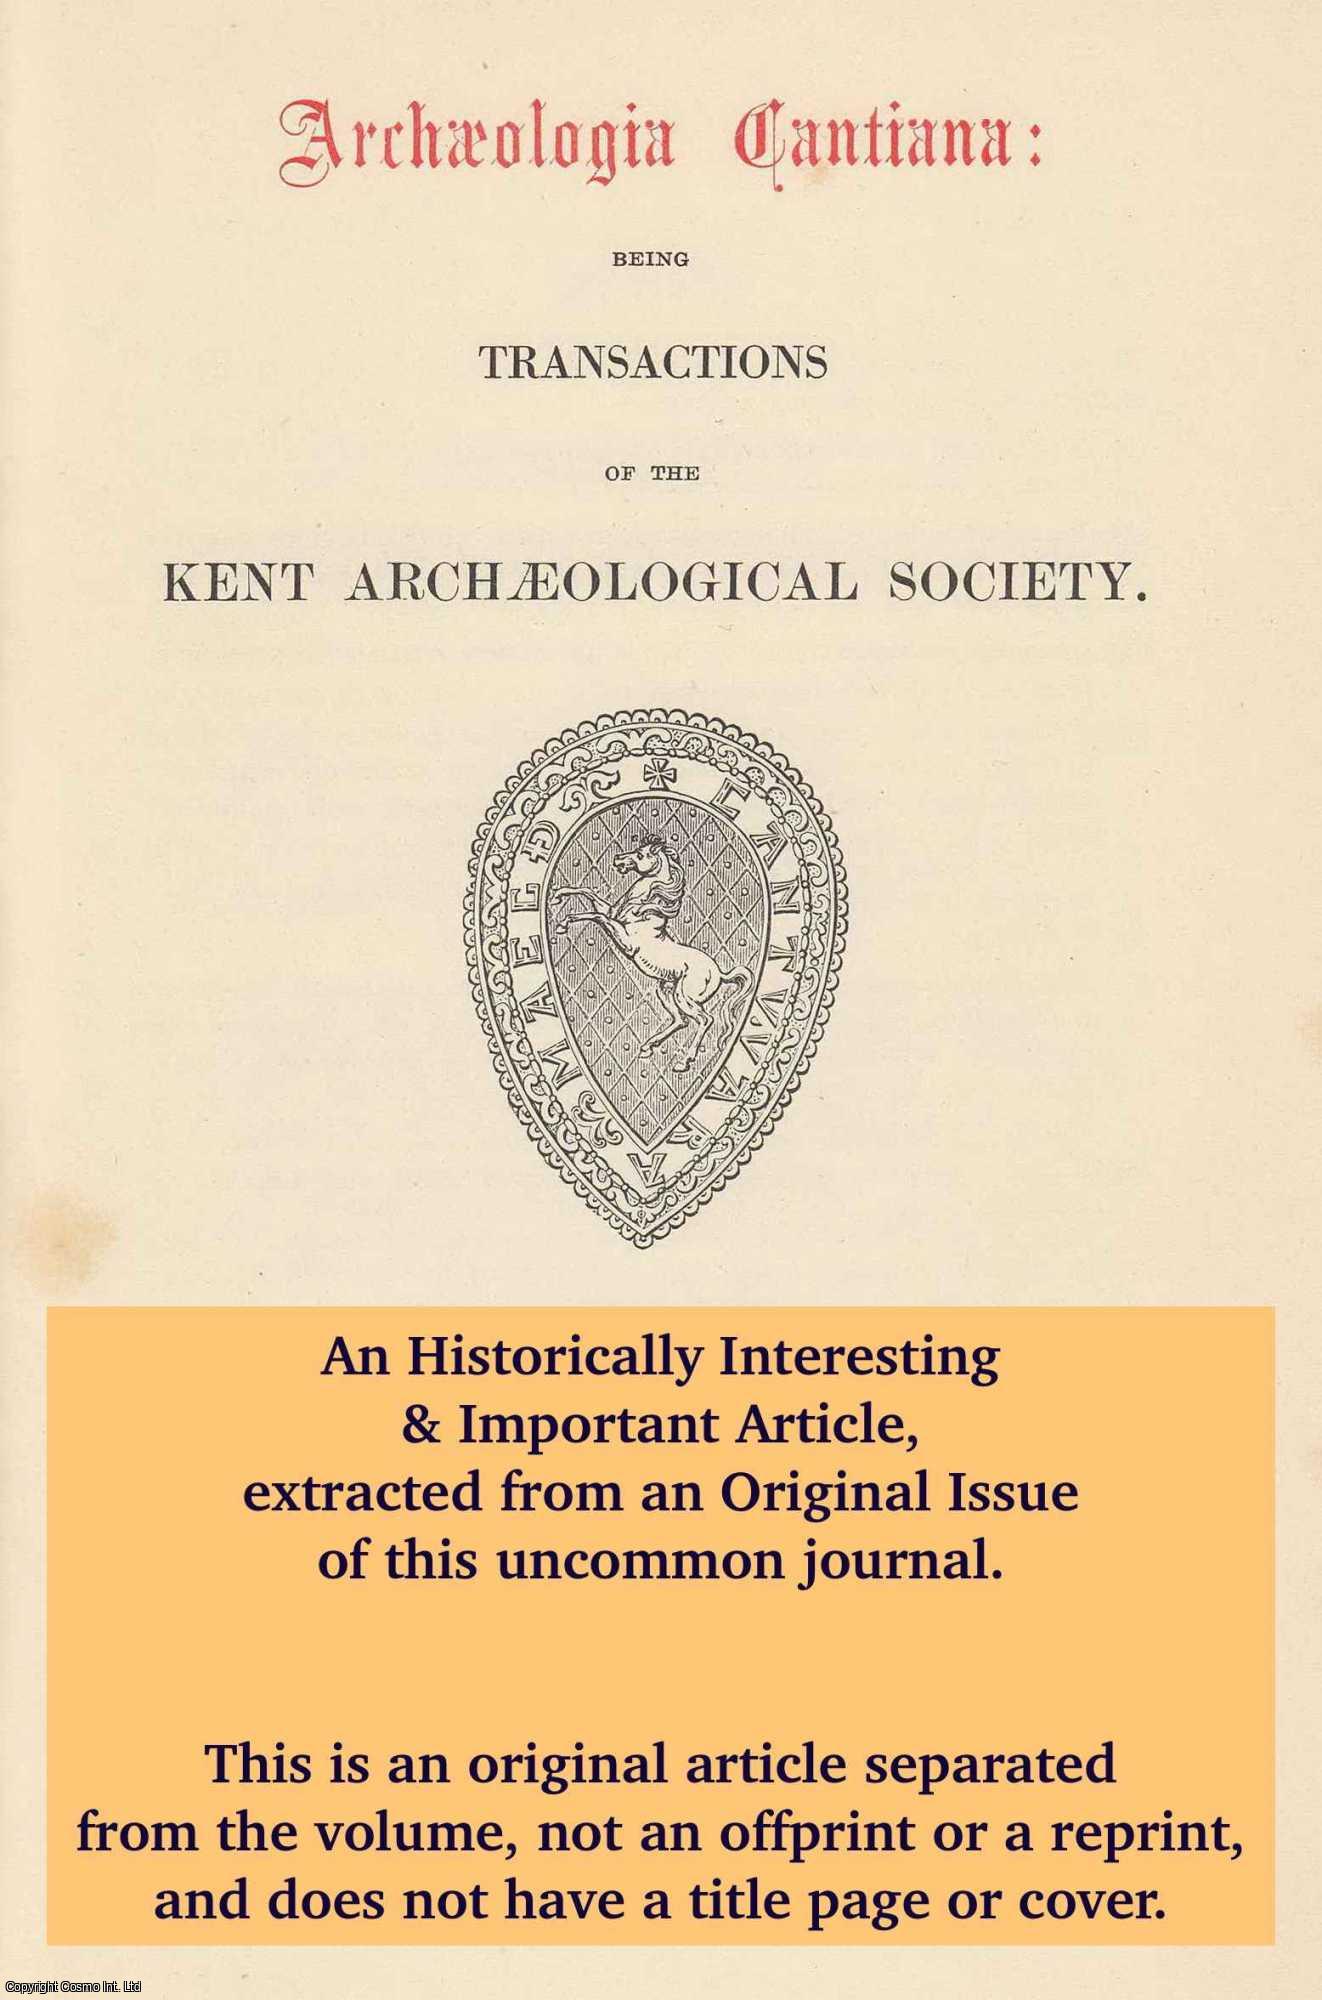 A.G. Woodcock - Mesolithic Discoveries at Perry Woods, Selling, near Canterbury, Kent. An original article from The Archaeologia Cantiana: Transactions of The Kent Archaeological Society, 1976.